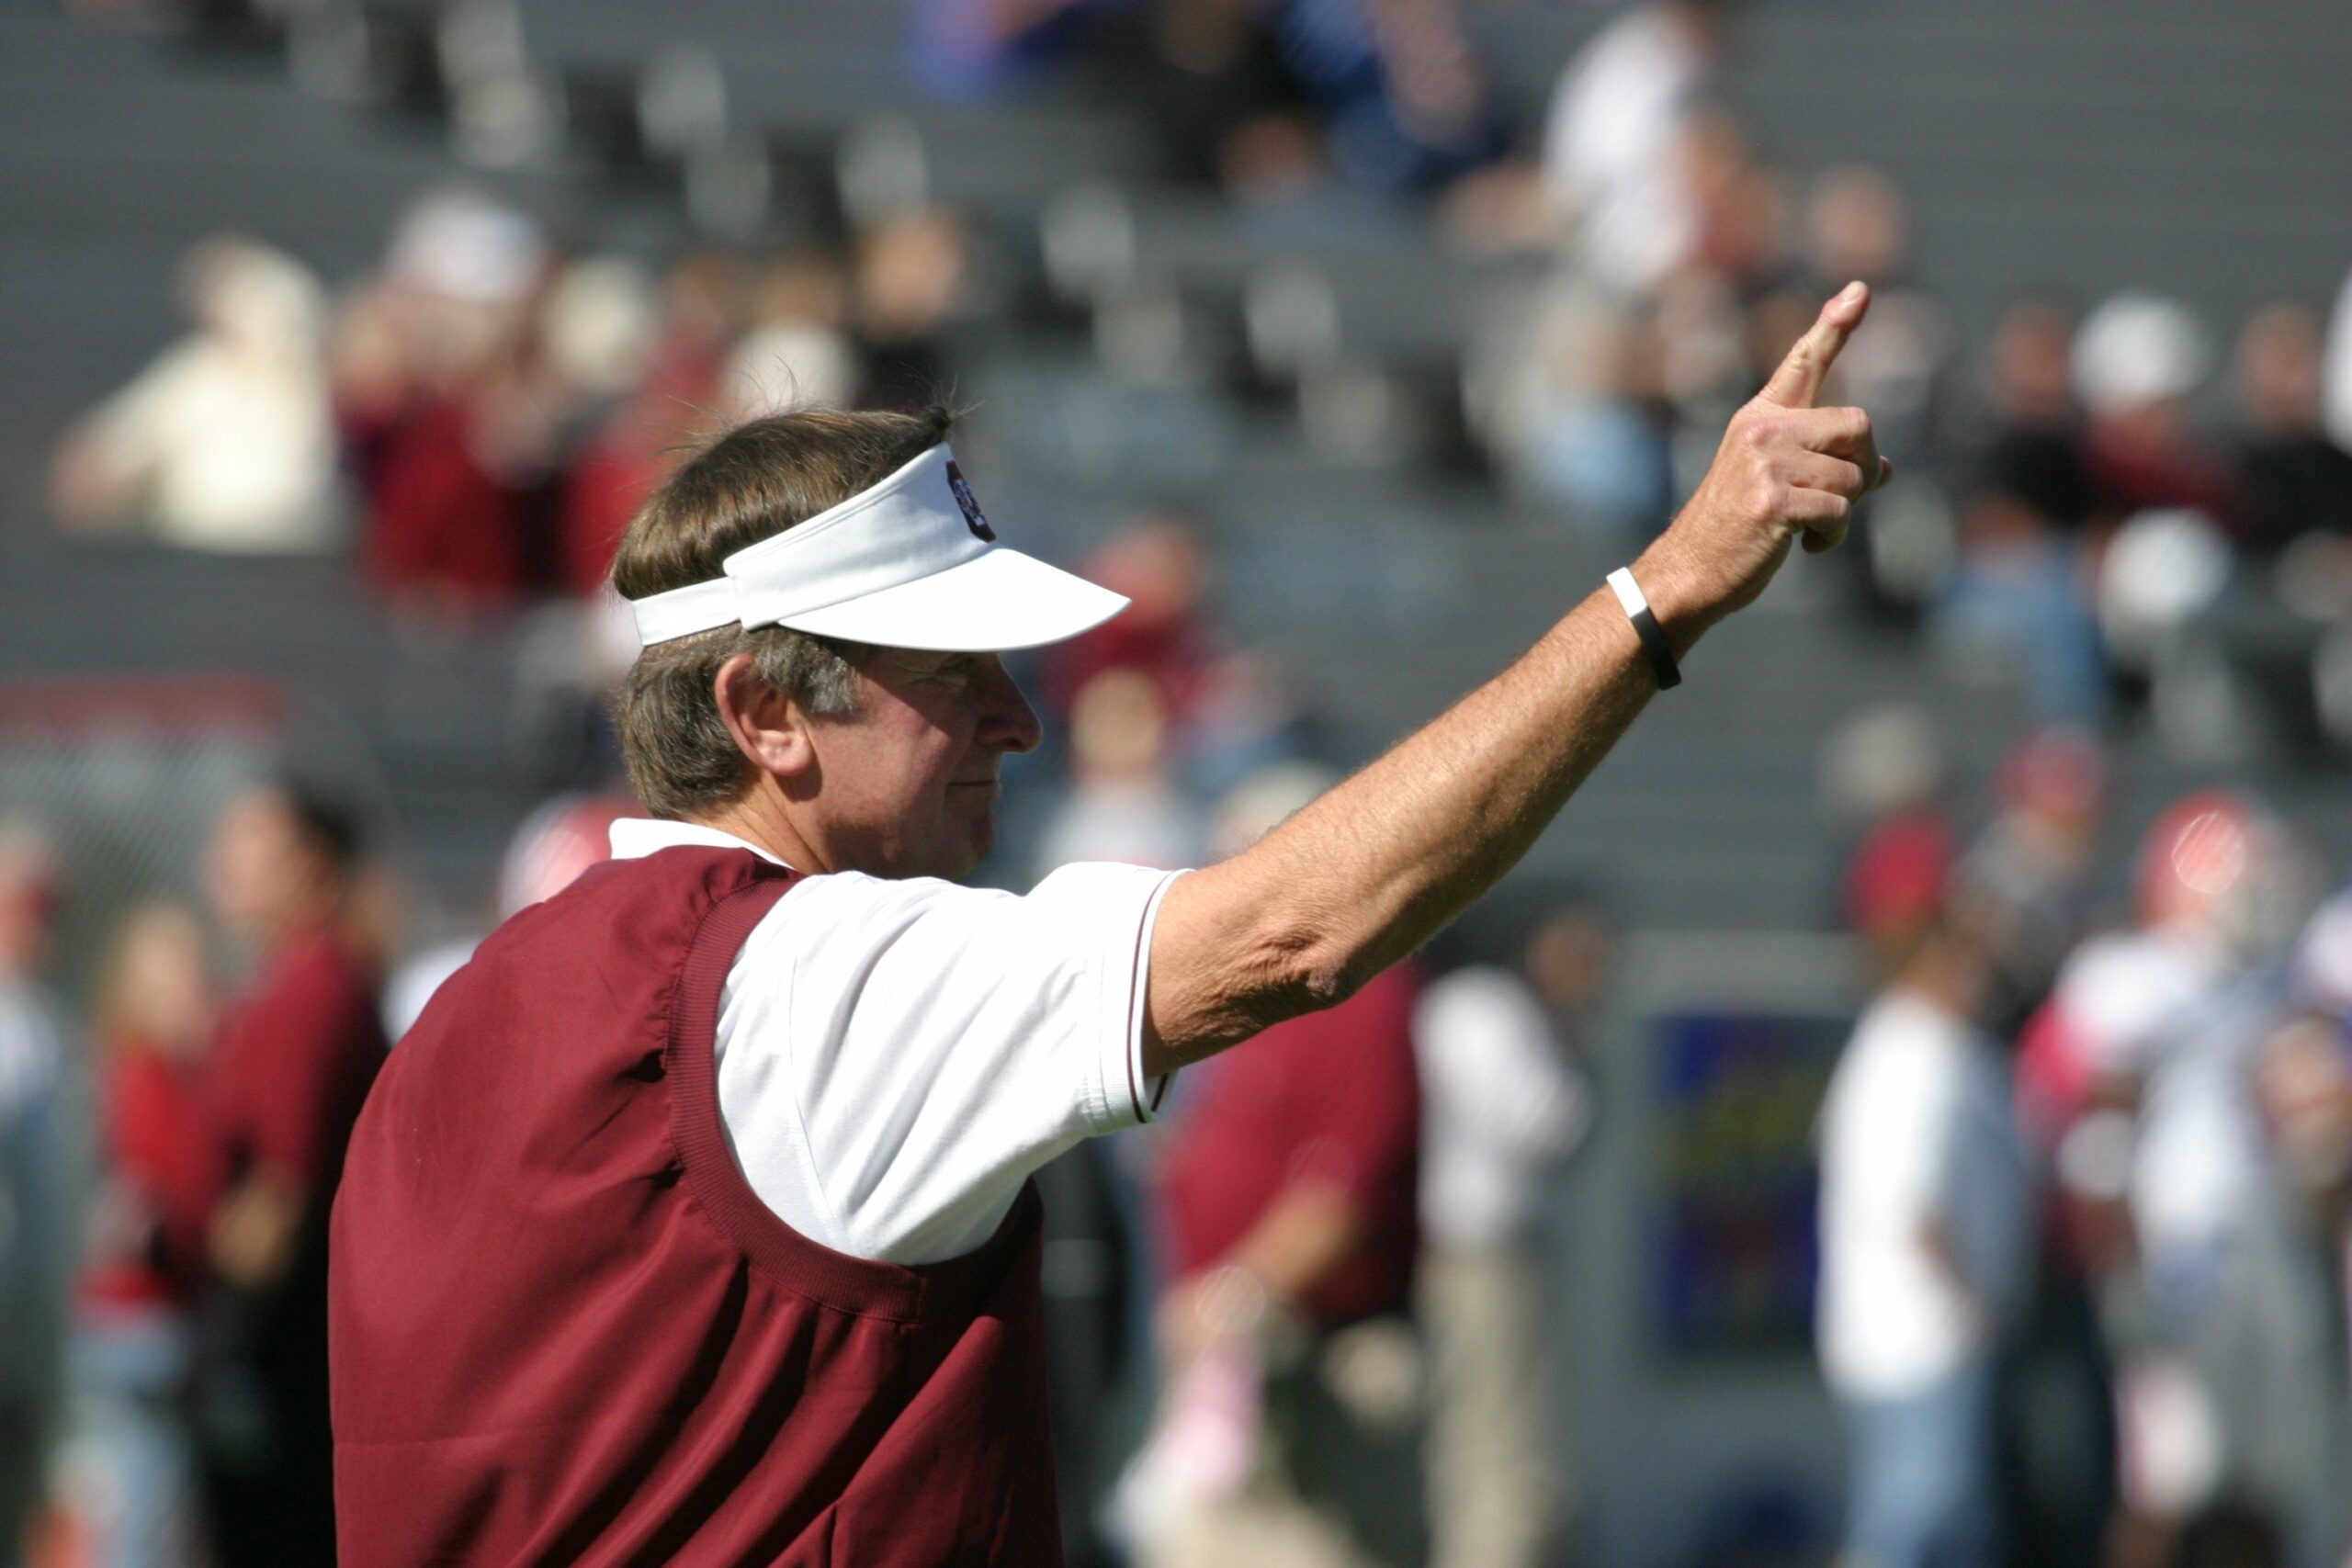 Former South Carolina coach Steve Spurrier prior to the Florida football game played on Nov. 12, 2005. Photo by Paul Collins, GamecockCentral.com.